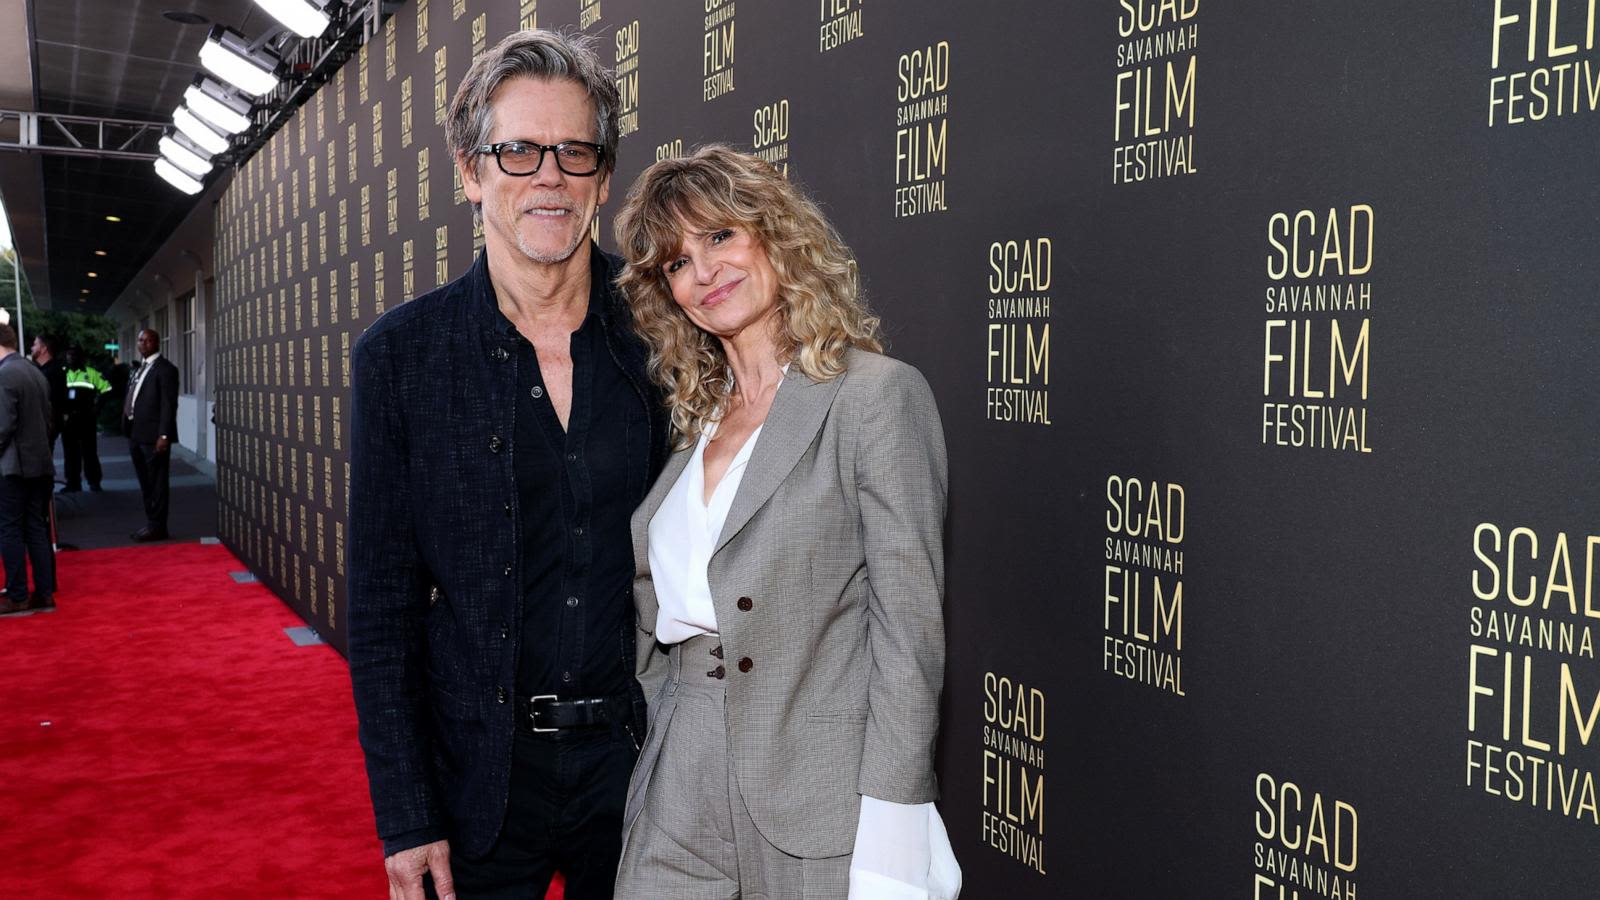 Kevin Bacon and Kyra Sedgwick share made-up words while playing 'Couple's Dictionary' trend